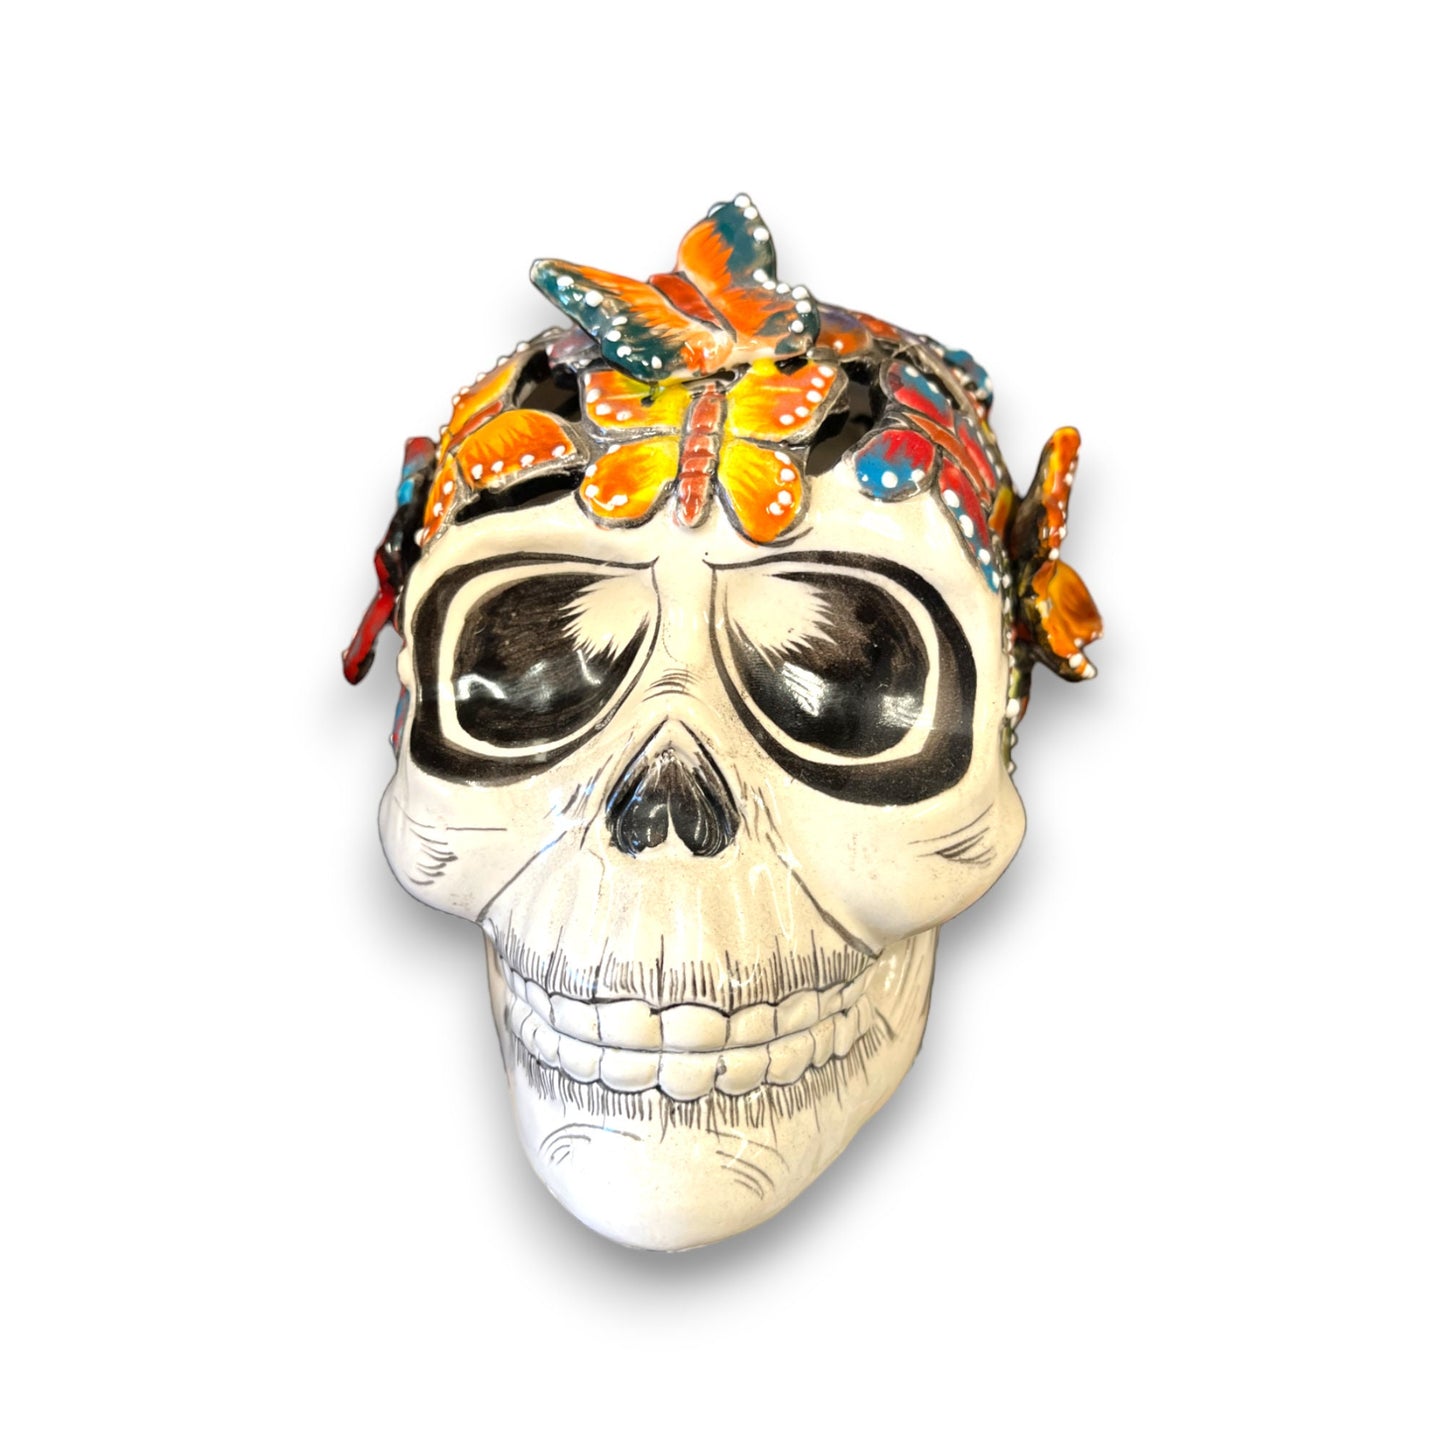 Mexican Handmade Skull Statue | Intriguing and Spooky Home Decor